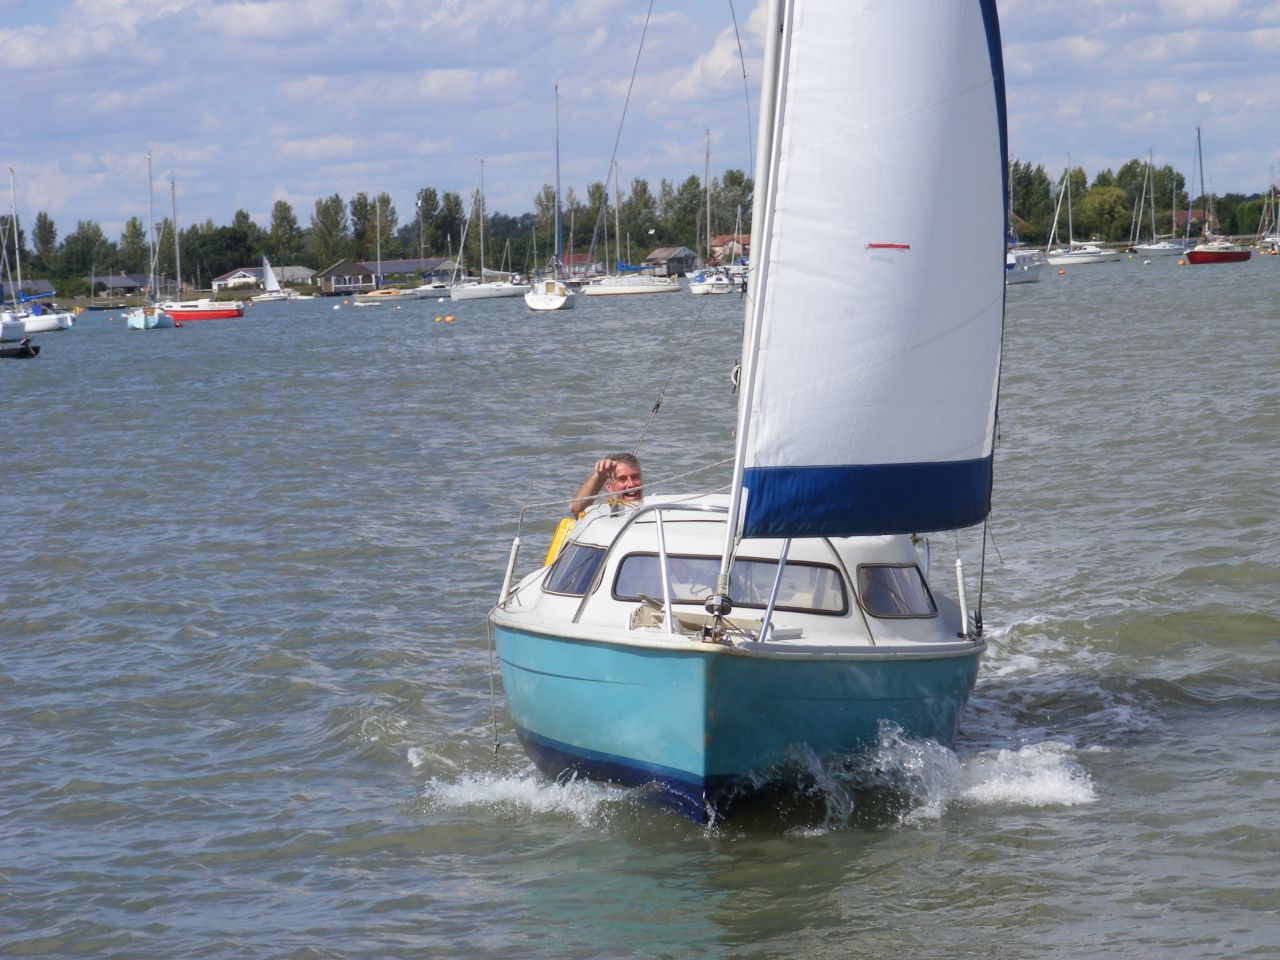 The 18-foot Sailfish yacht was acquired for no more than the price of a second-hand car, while the annual cost of ownership is comparable to a gym membership. 